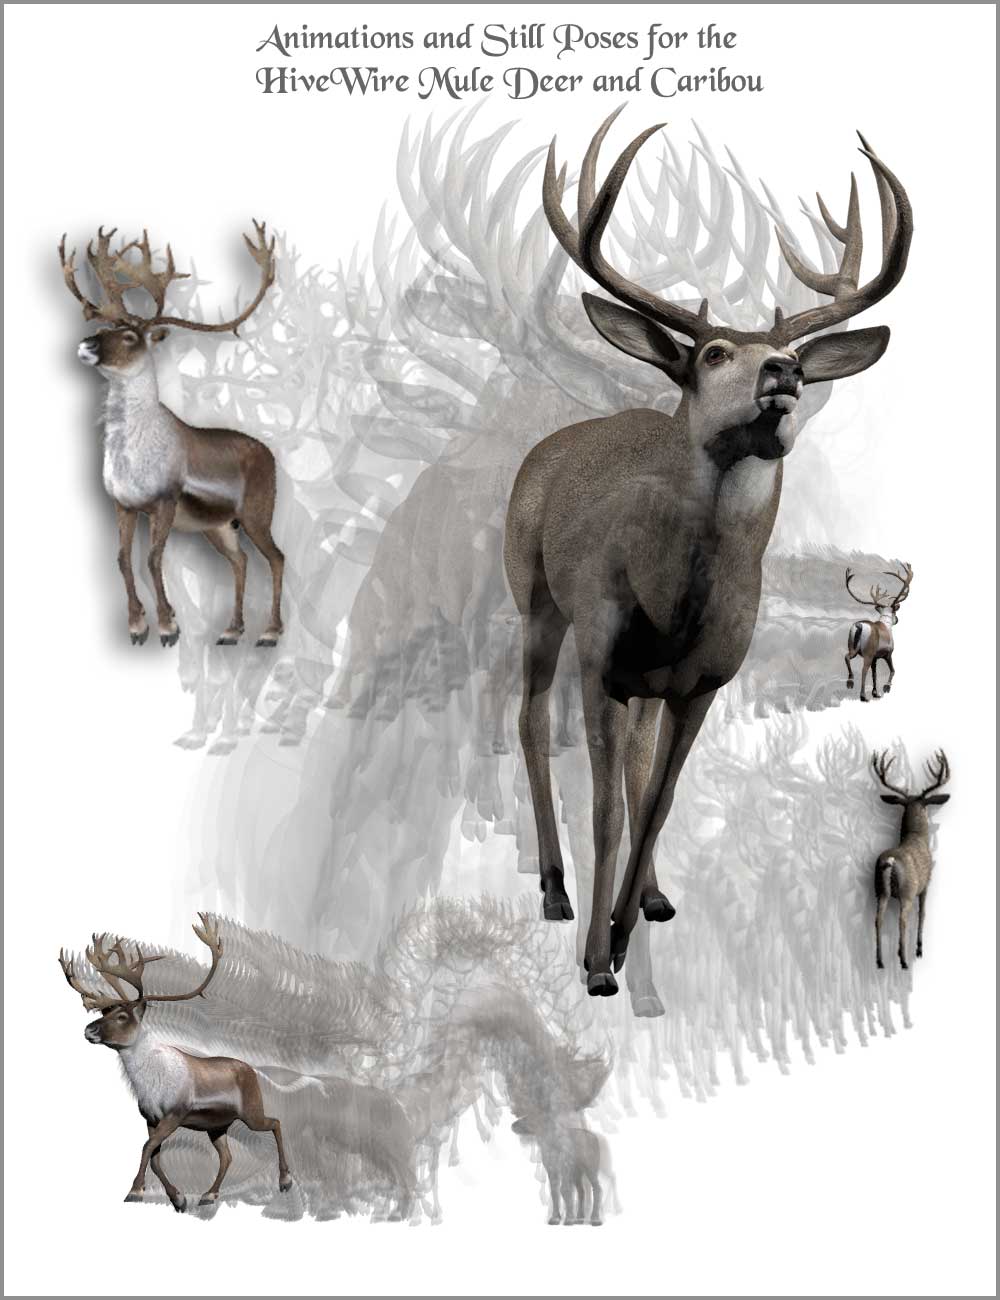 12112-animations-and-poses-for-the-hw-mule-deer-and-caribou-main.jpg